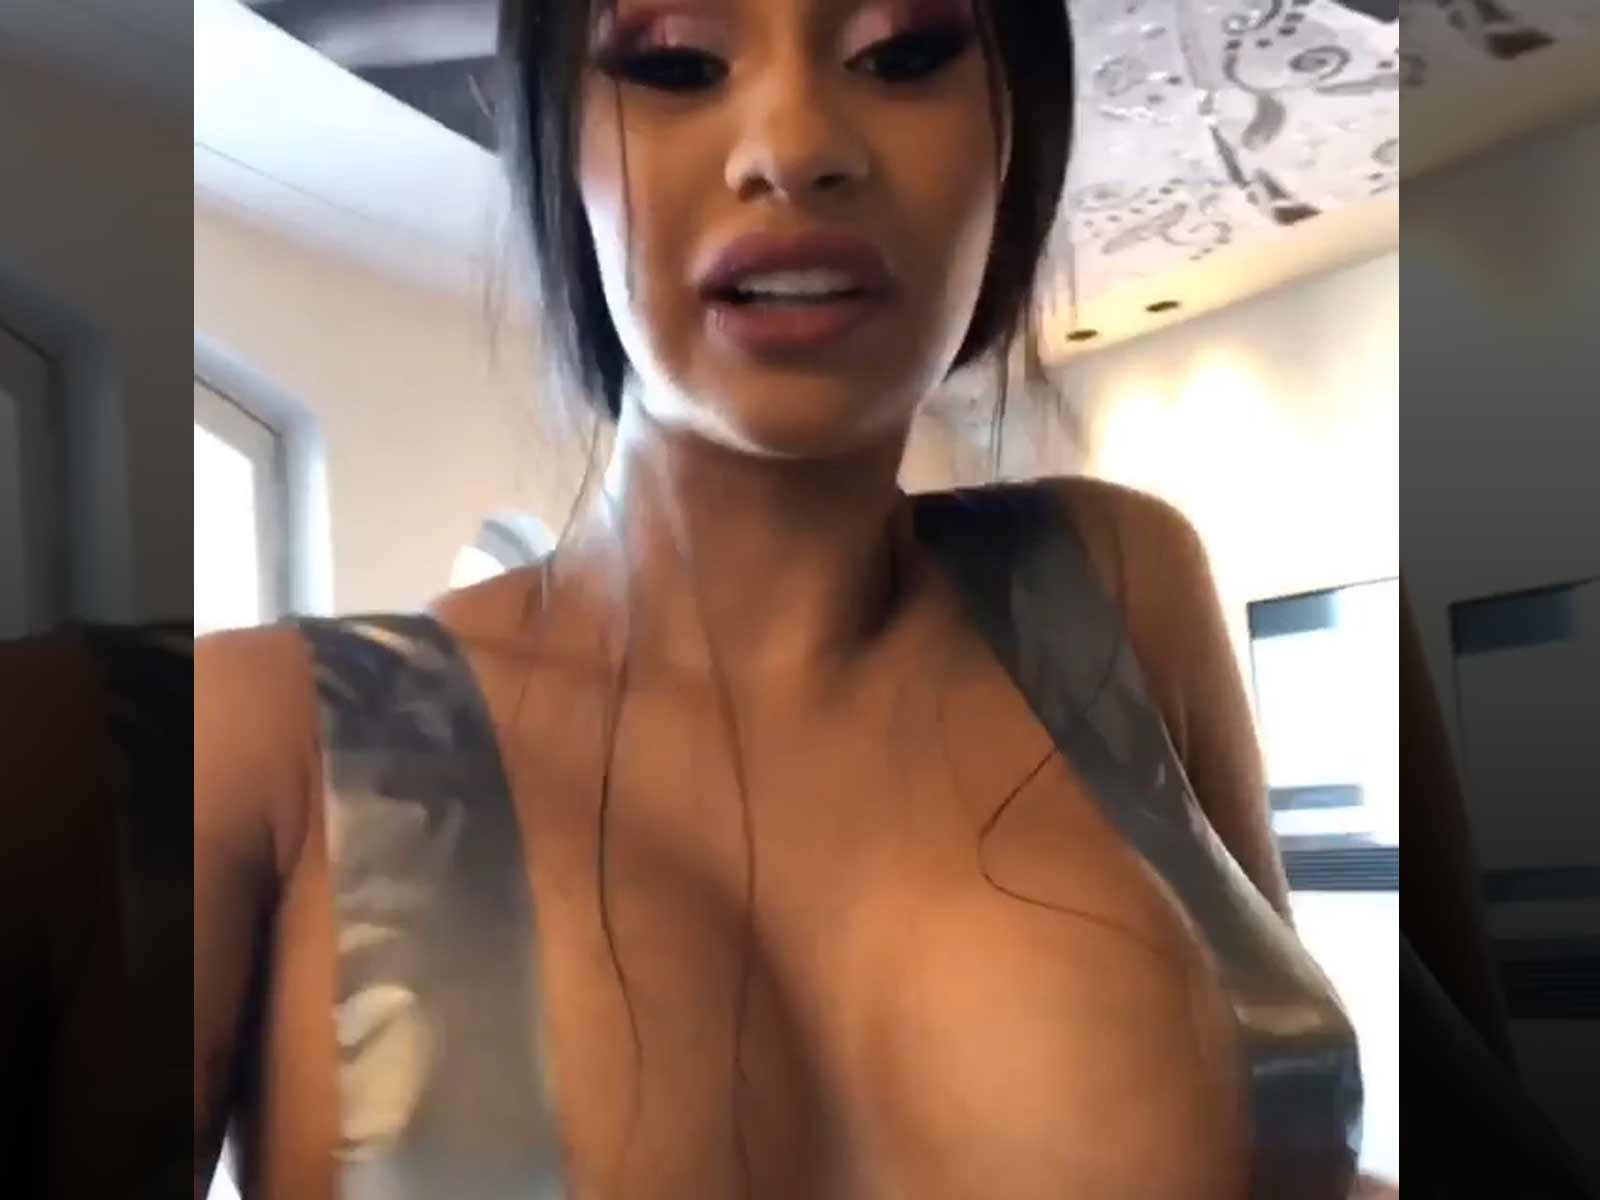 Cardi B Gets a Makeshift Breast Lift: Now, That's a Sticky Situation